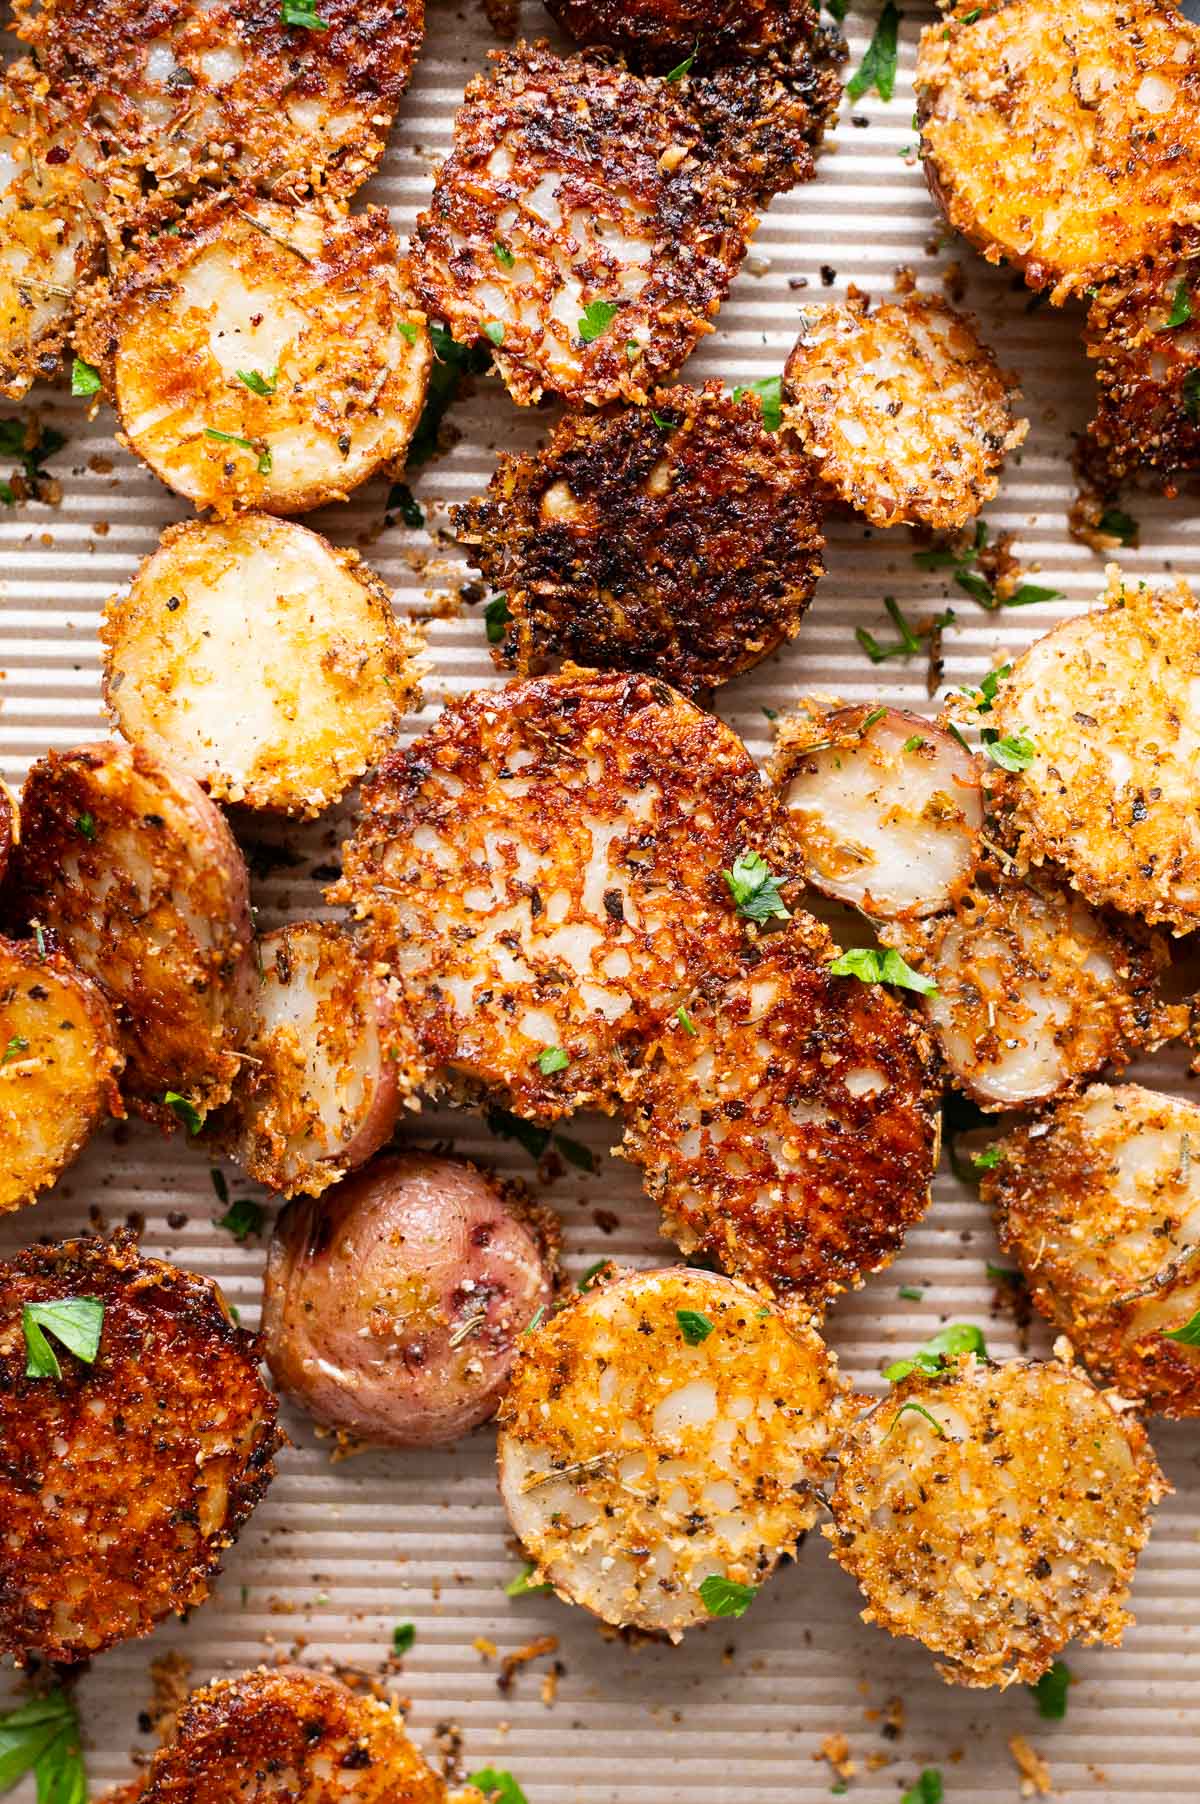 Crispy Parmesan potatoes garnished with parsley on a baking sheet.